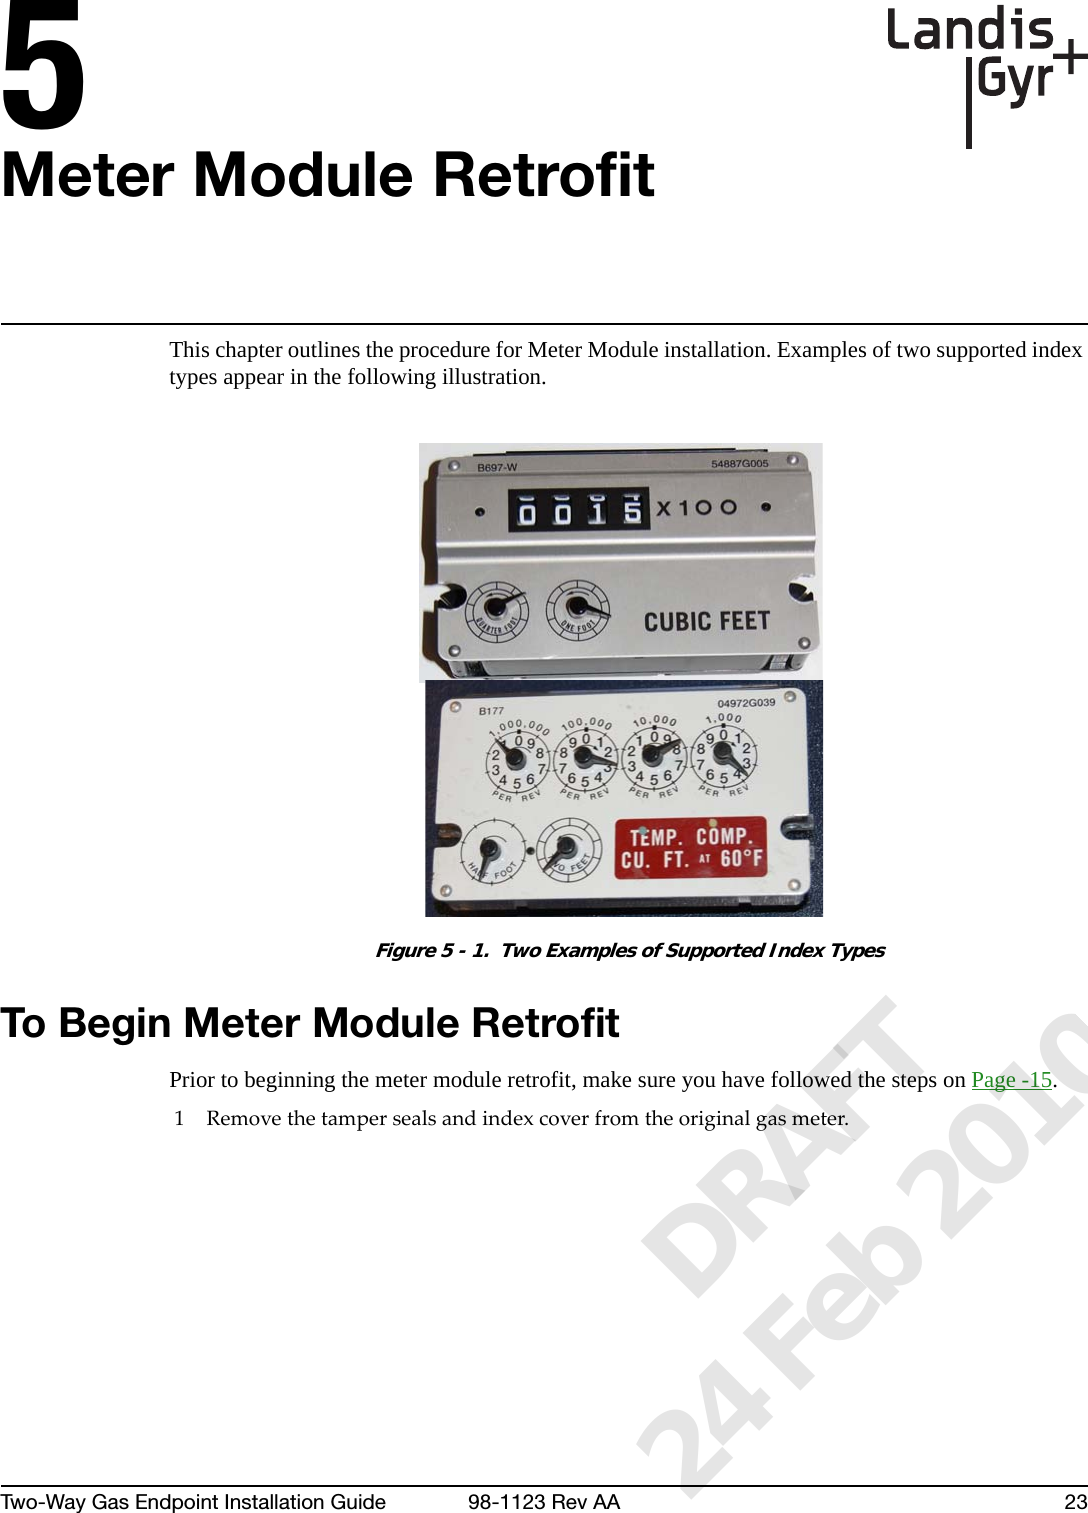 5Two-Way Gas Endpoint Installation Guide 98-1123 Rev AA 23Meter Module RetrofitThis chapter outlines the procedure for Meter Module installation. Examples of two supported index types appear in the following illustration.Figure 5 - 1.  Two Examples of Supported Index TypesTo Begin Meter Module RetrofitPrior to beginning the meter module retrofit, make sure you have followed the steps on Page -15.1Removethetampersealsandindexcoverfromtheoriginalgasmeter.      DRAFT 24 Feb 2010